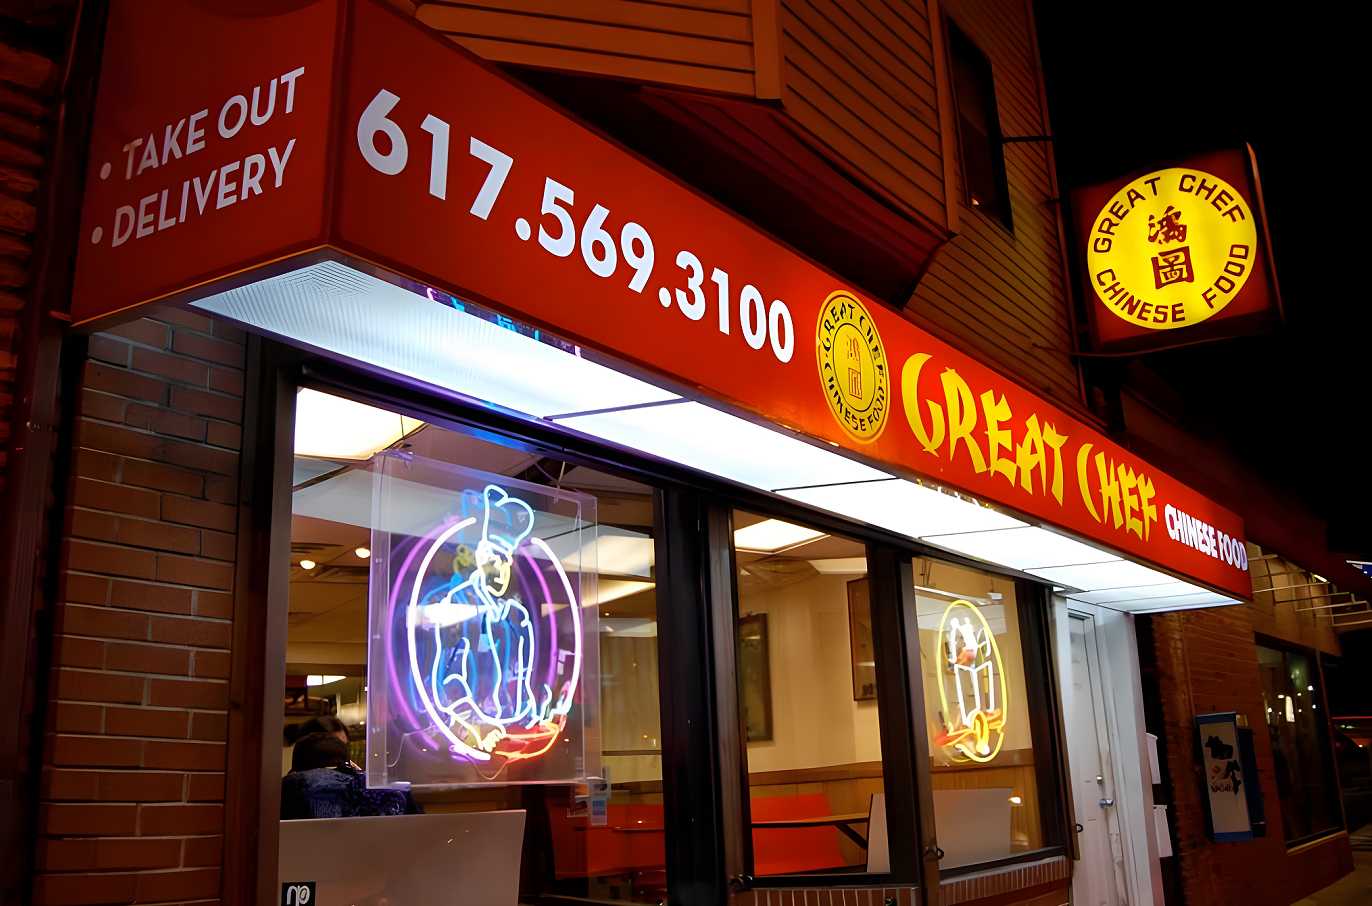 Great Chef Chinese Food Best Chinese Restaurants in Boston, MA